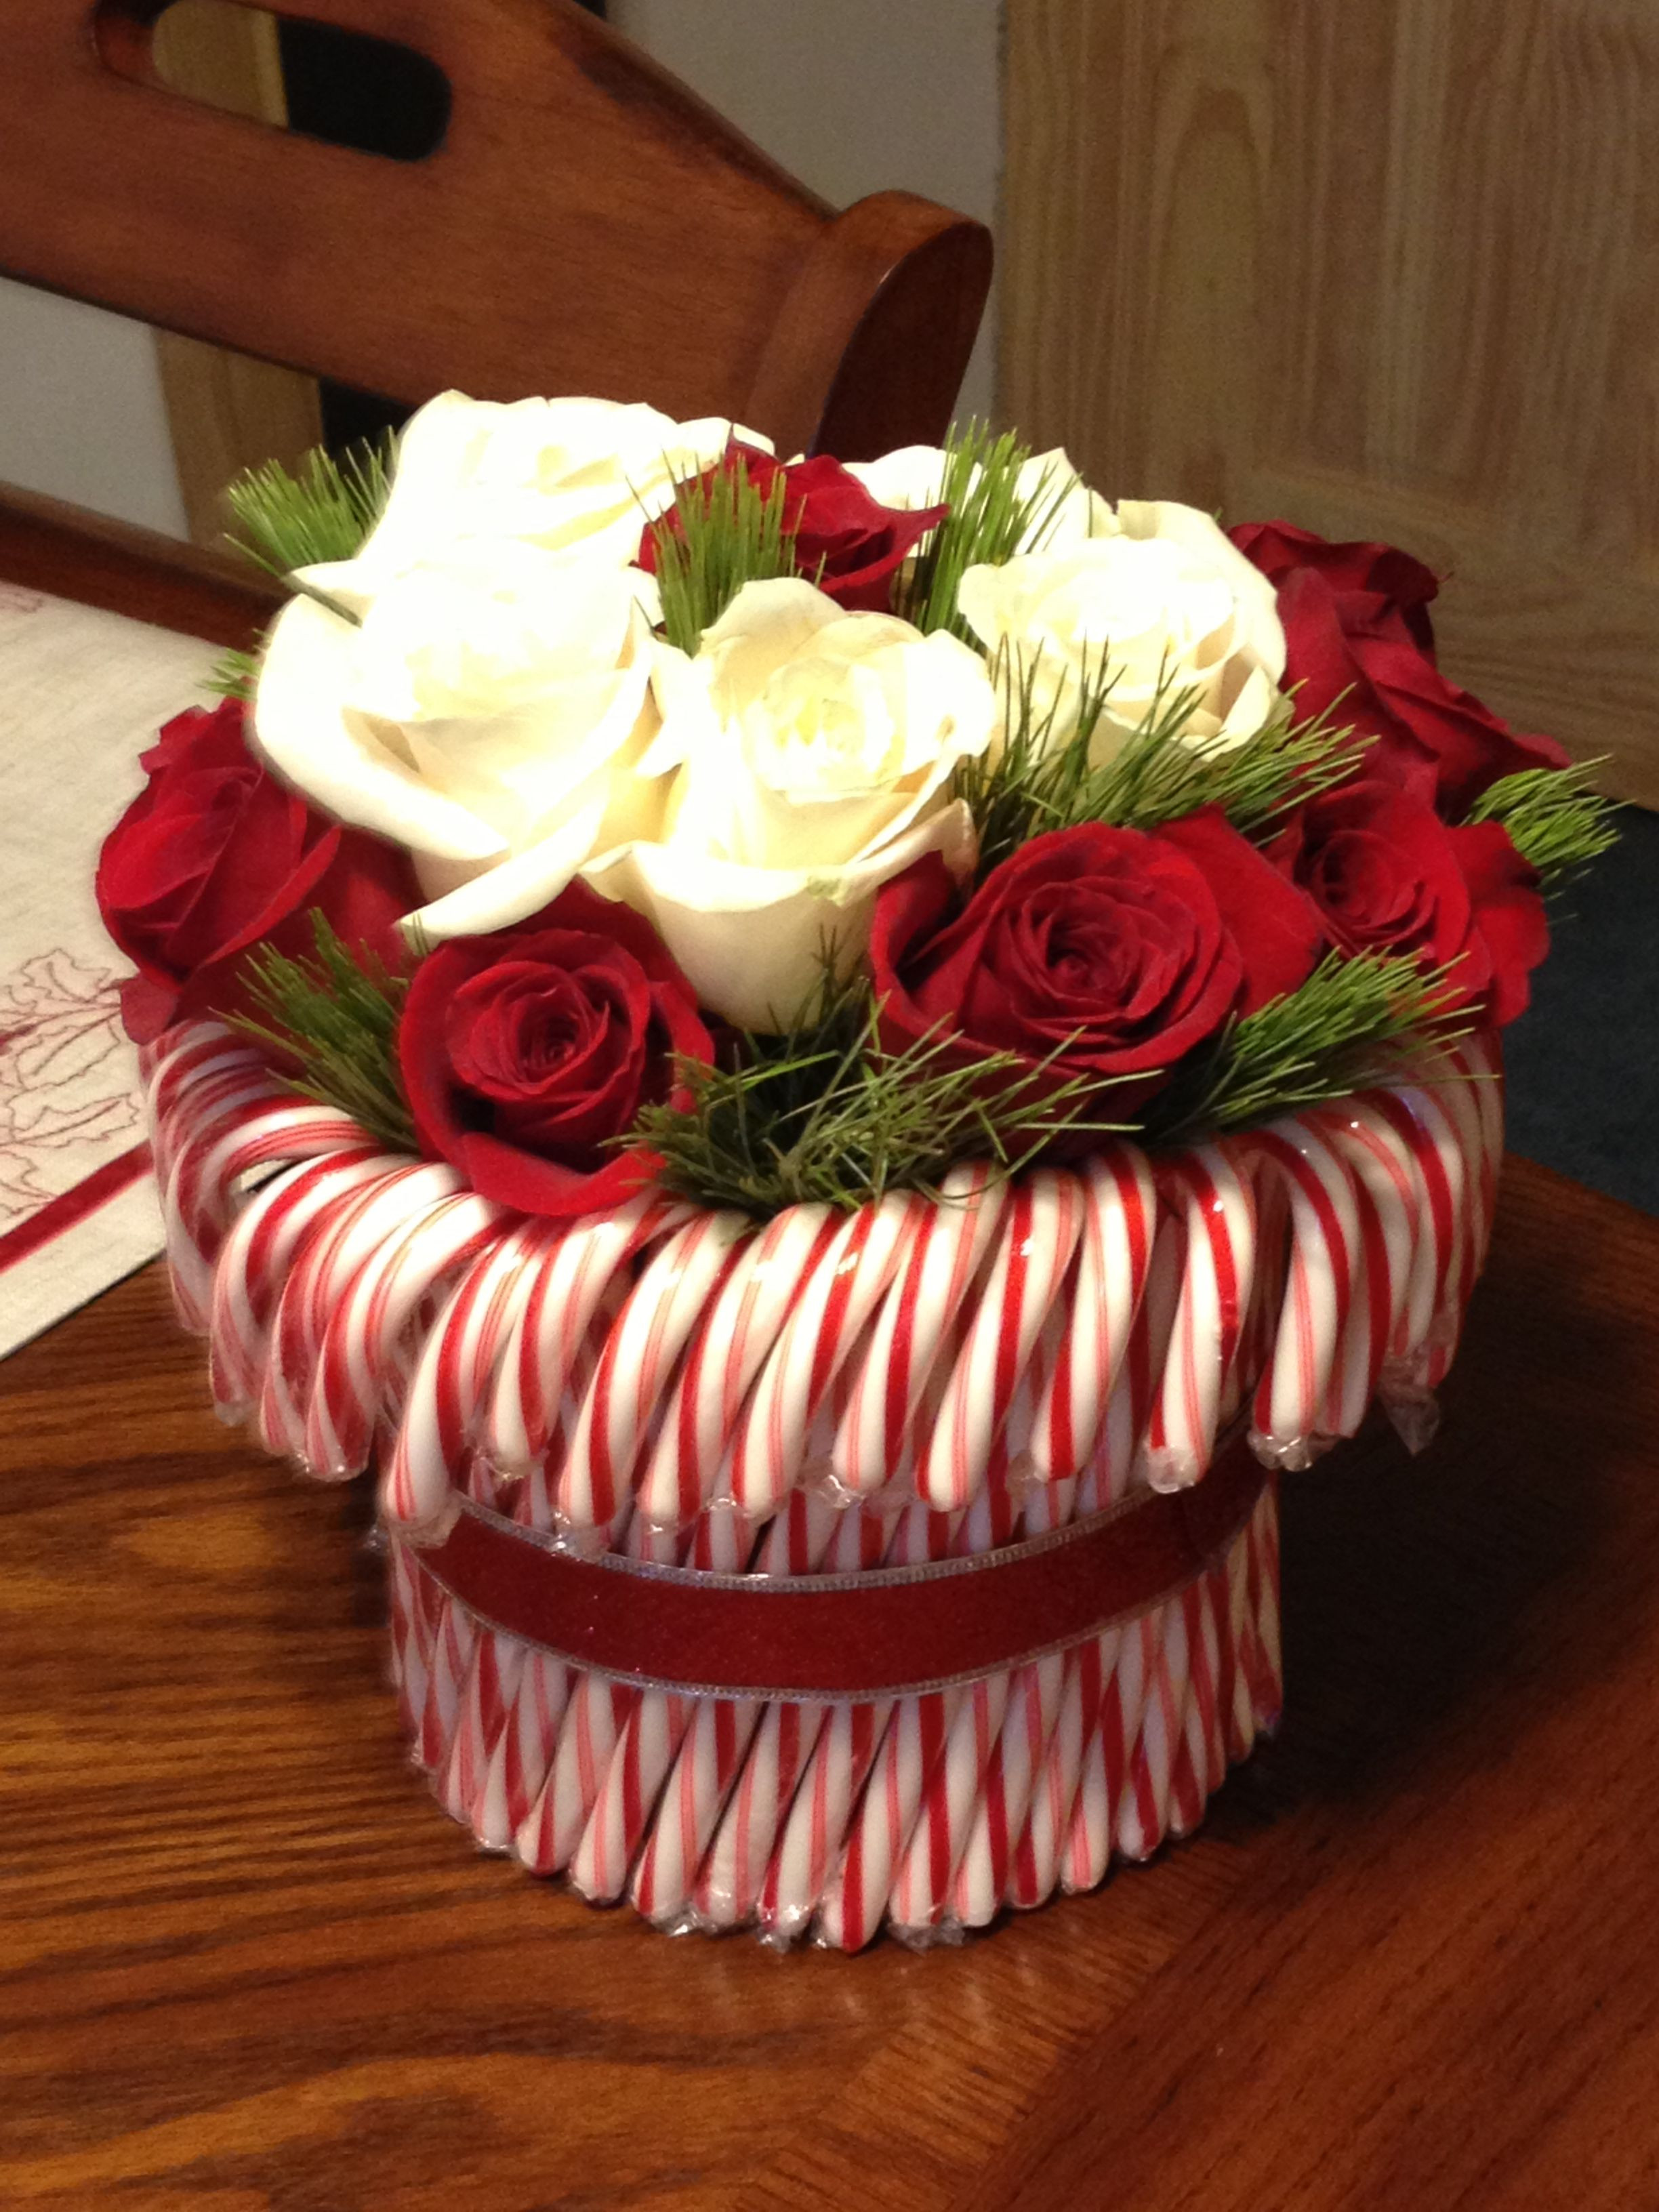 Candy Cane Centerpieces For Christmas
 Candy cane rose centerpiece My own creations